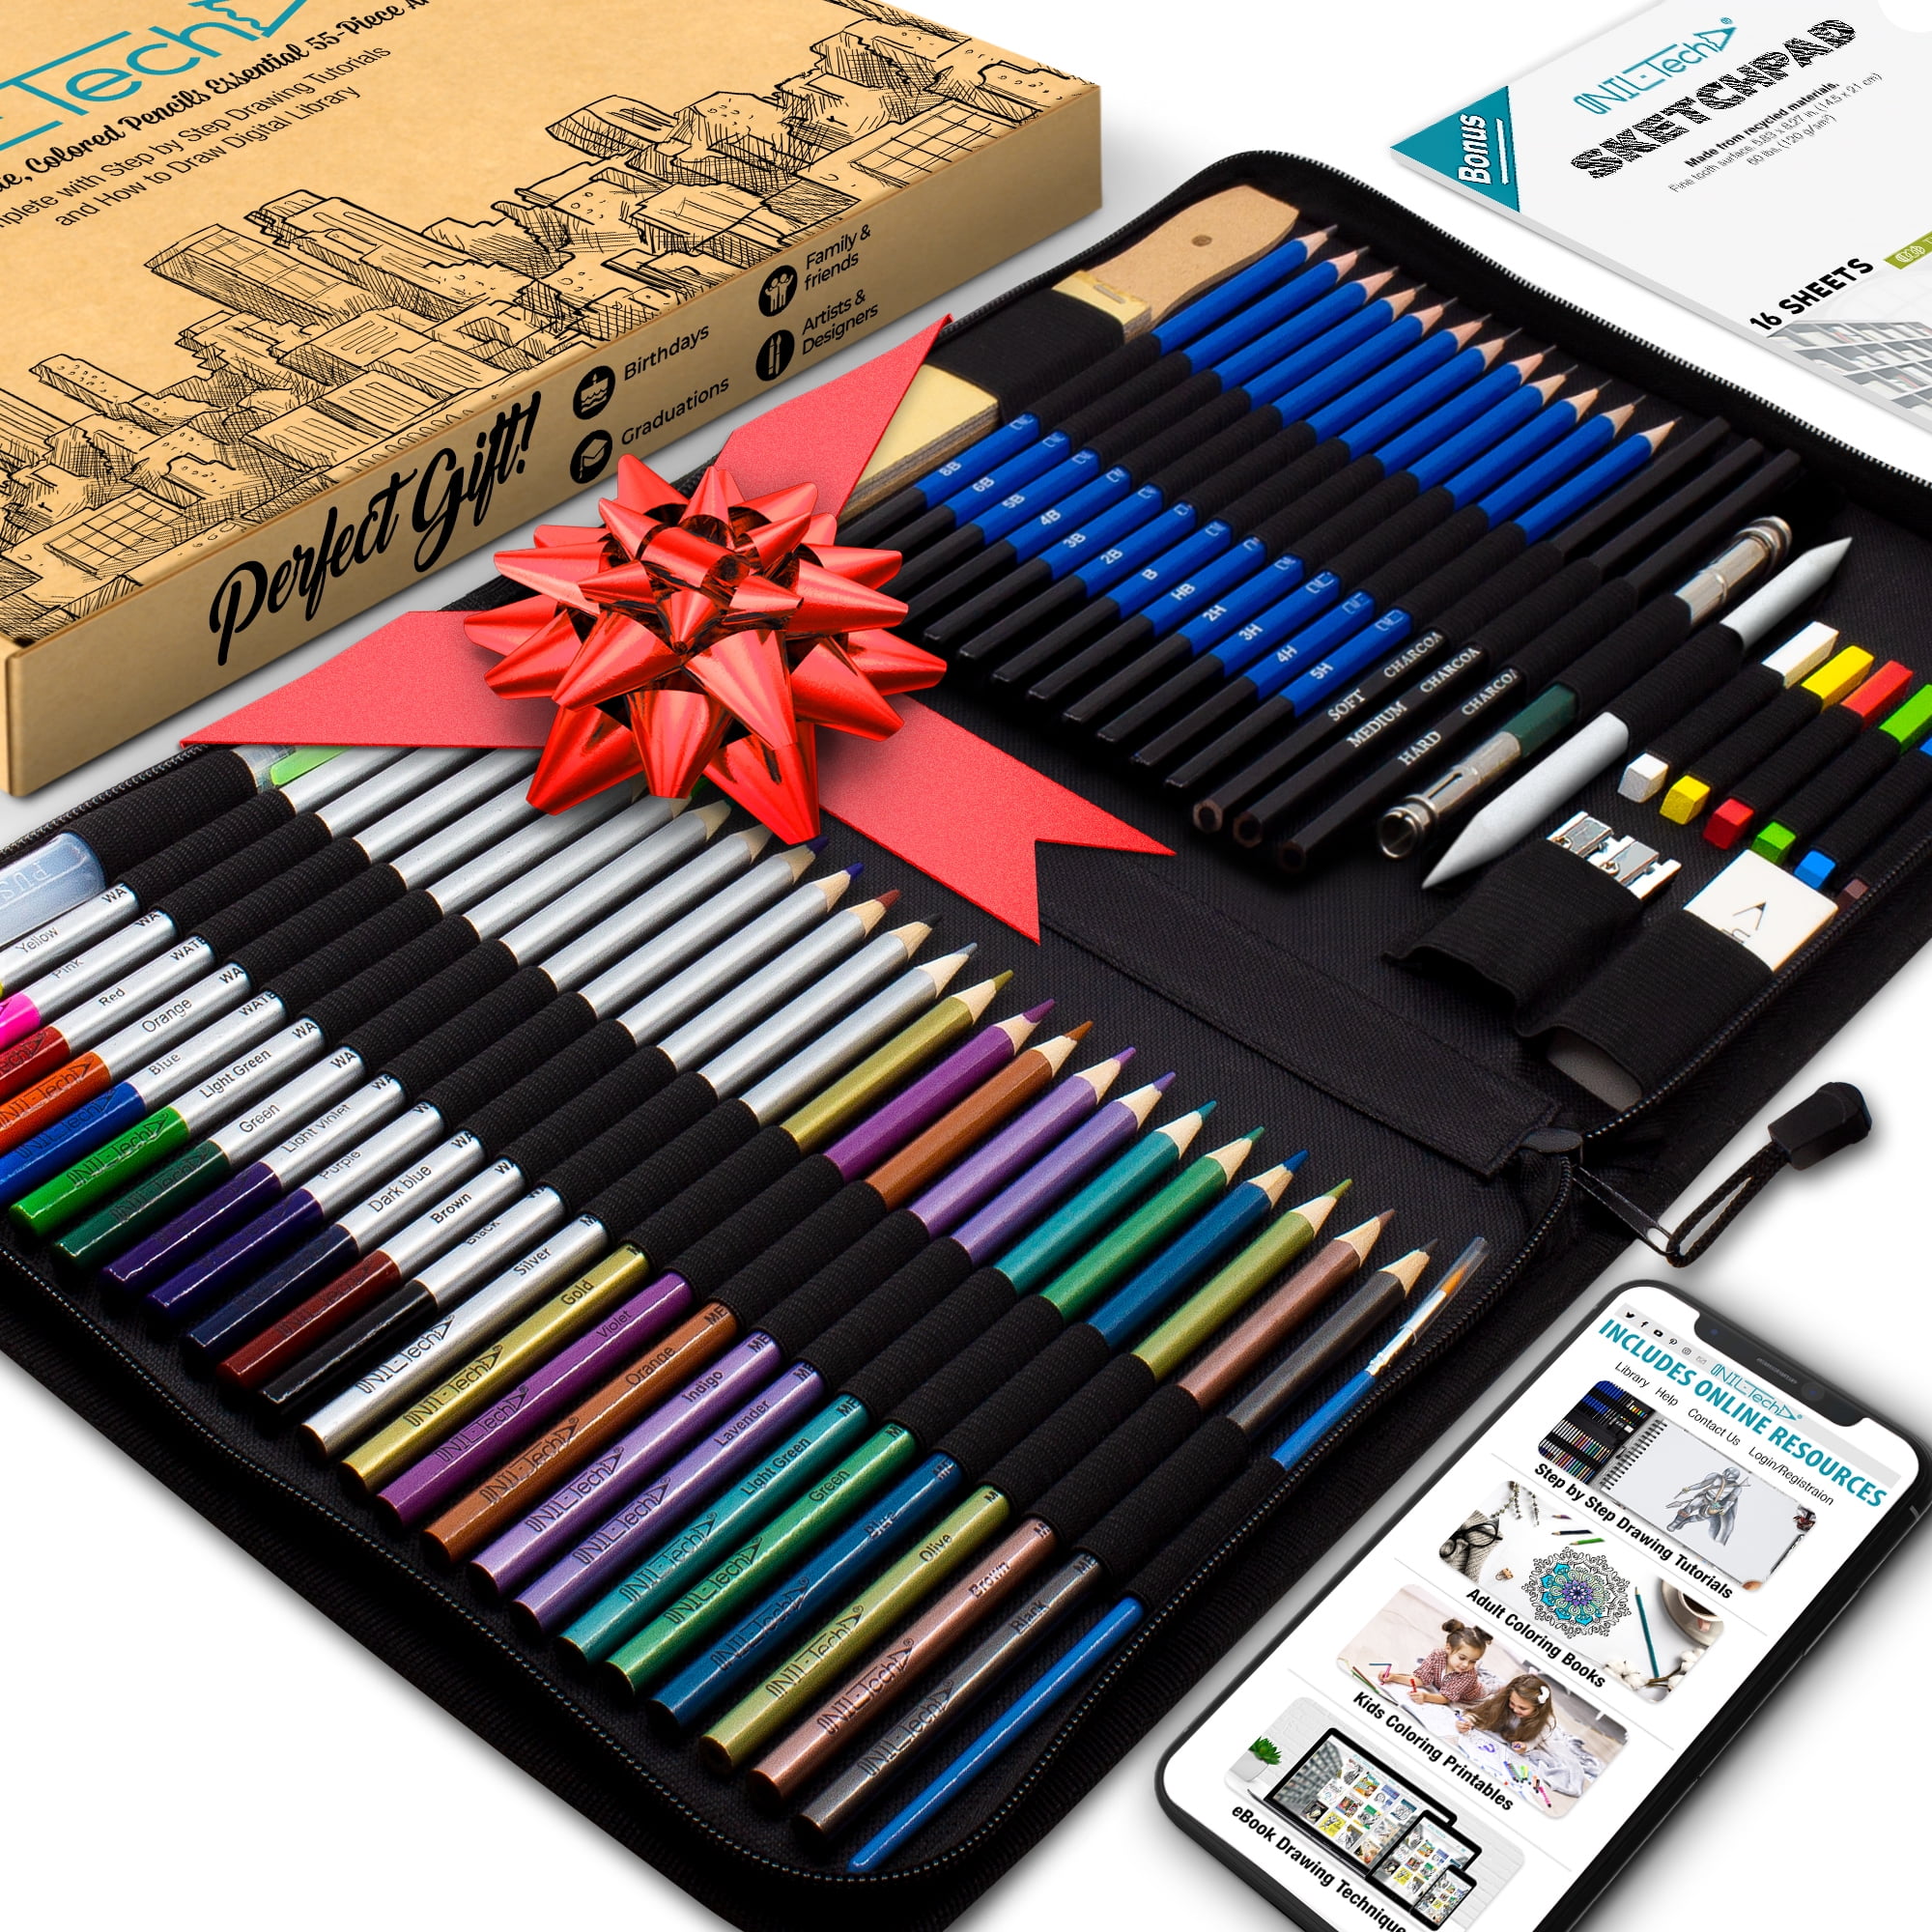  Shuttle Art Pencil Kit - 103 Drawing Pencils, Colored Pencils  and Graphite Pencils in Portable Case, Sketching Supplies for Kids, Adults  and Artists : Arts, Crafts & Sewing